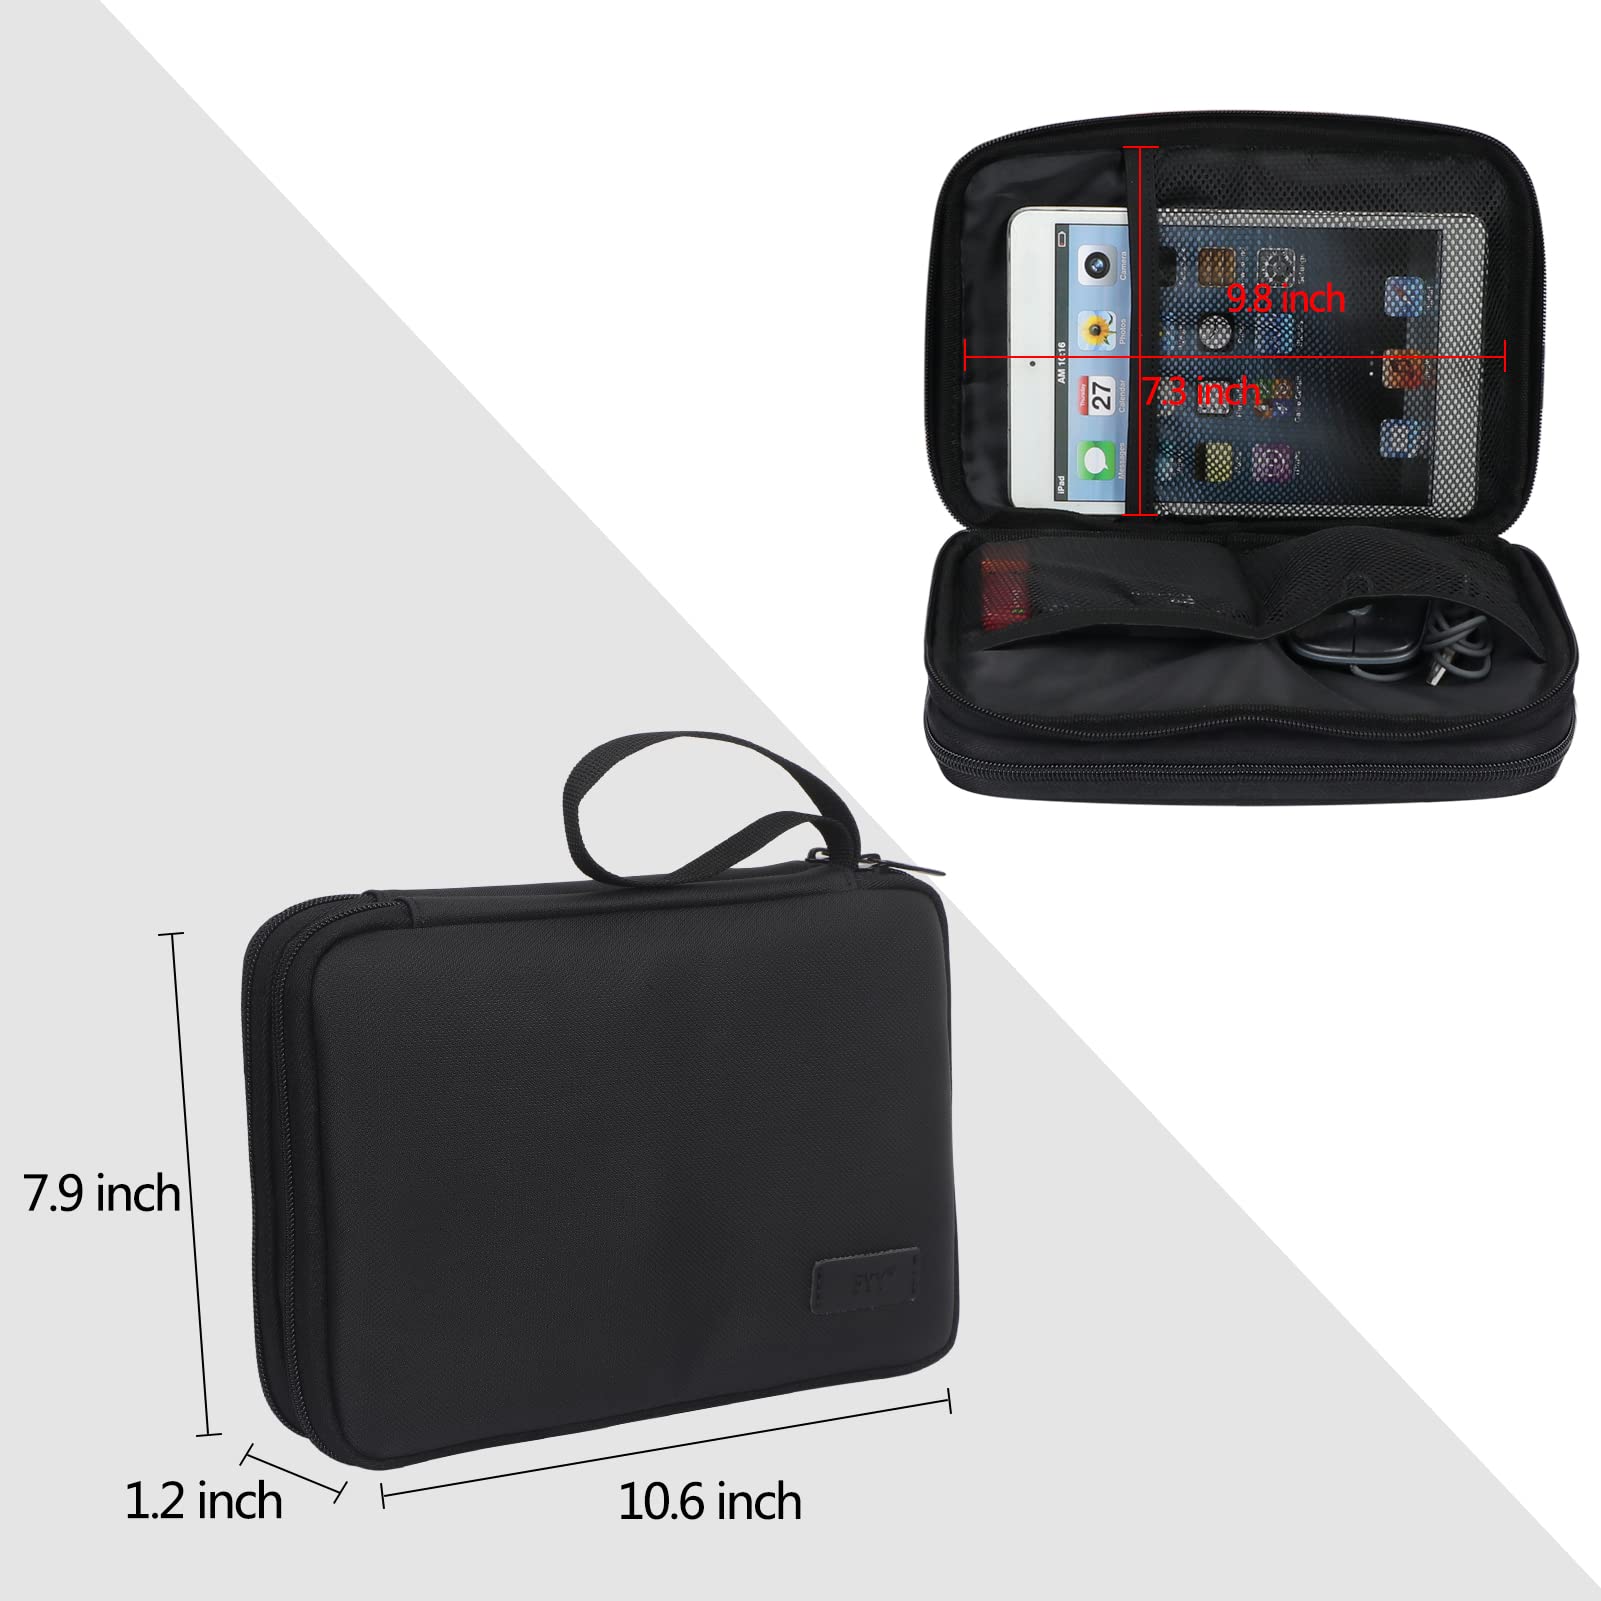 FYY Electronic Organizer Bag Set, Small Cable Case for Daily Use and Travel, Large Bag for Organisation at Home and Office